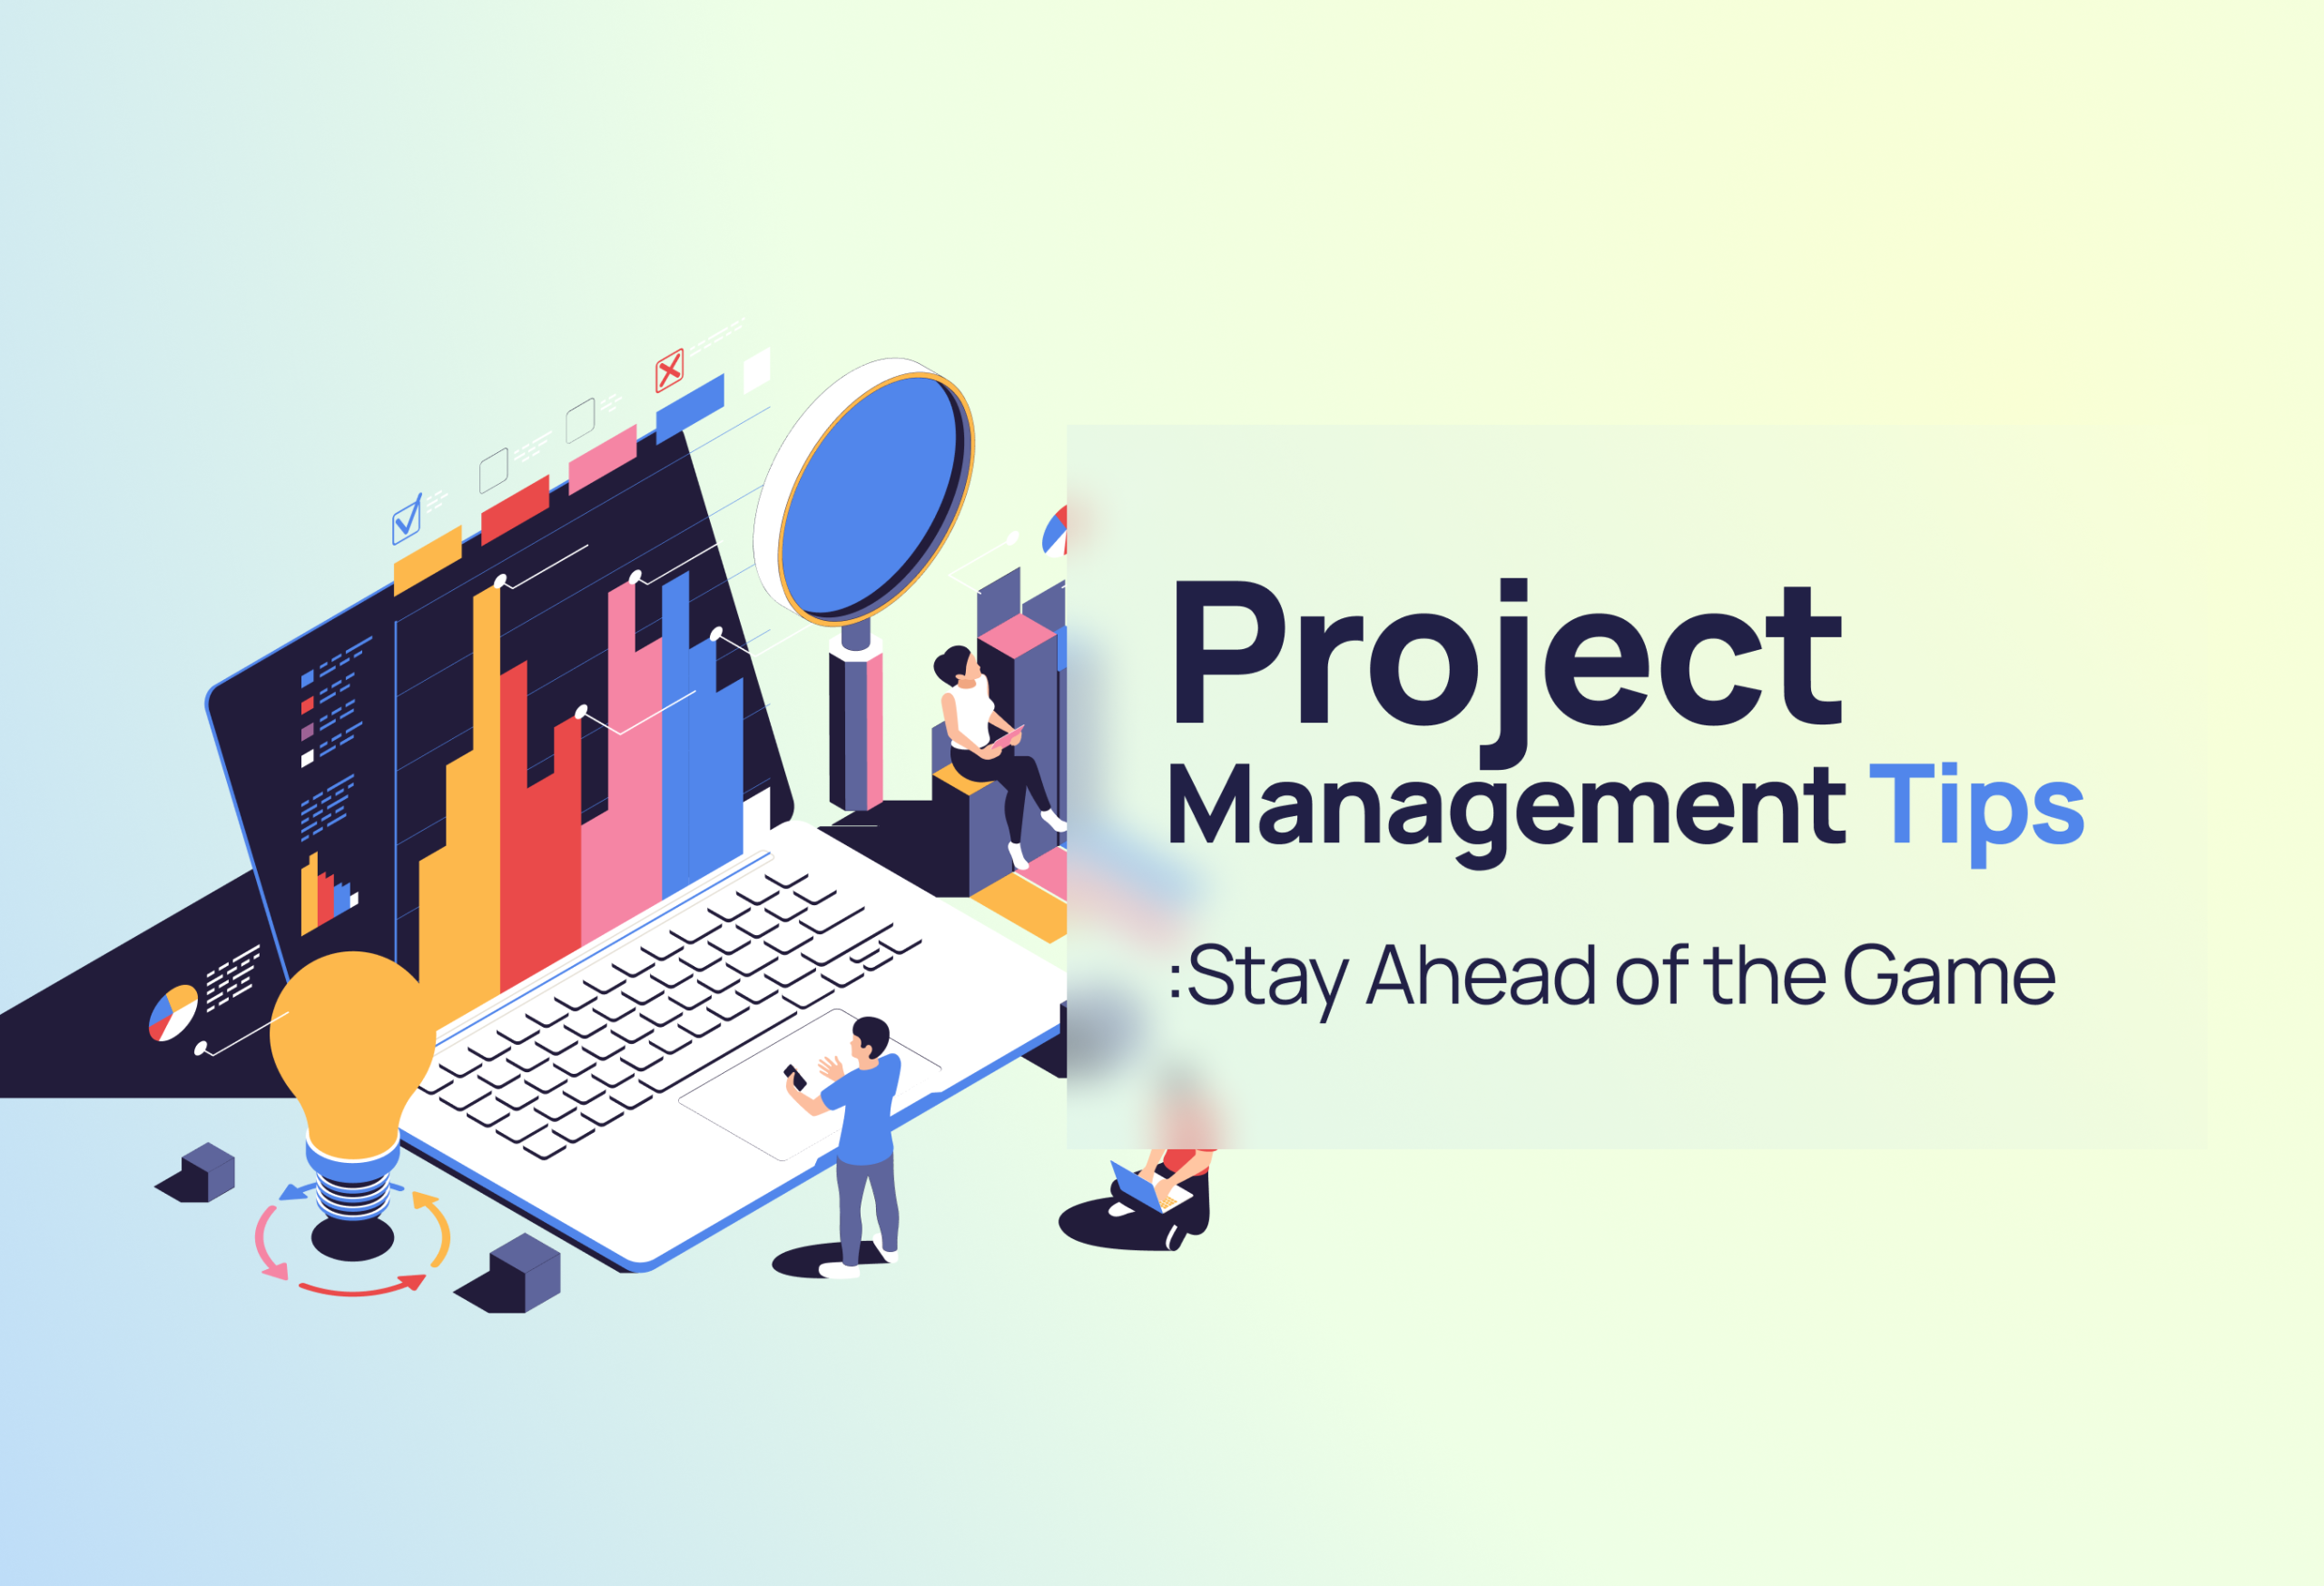 Top 5 Project Management Tips